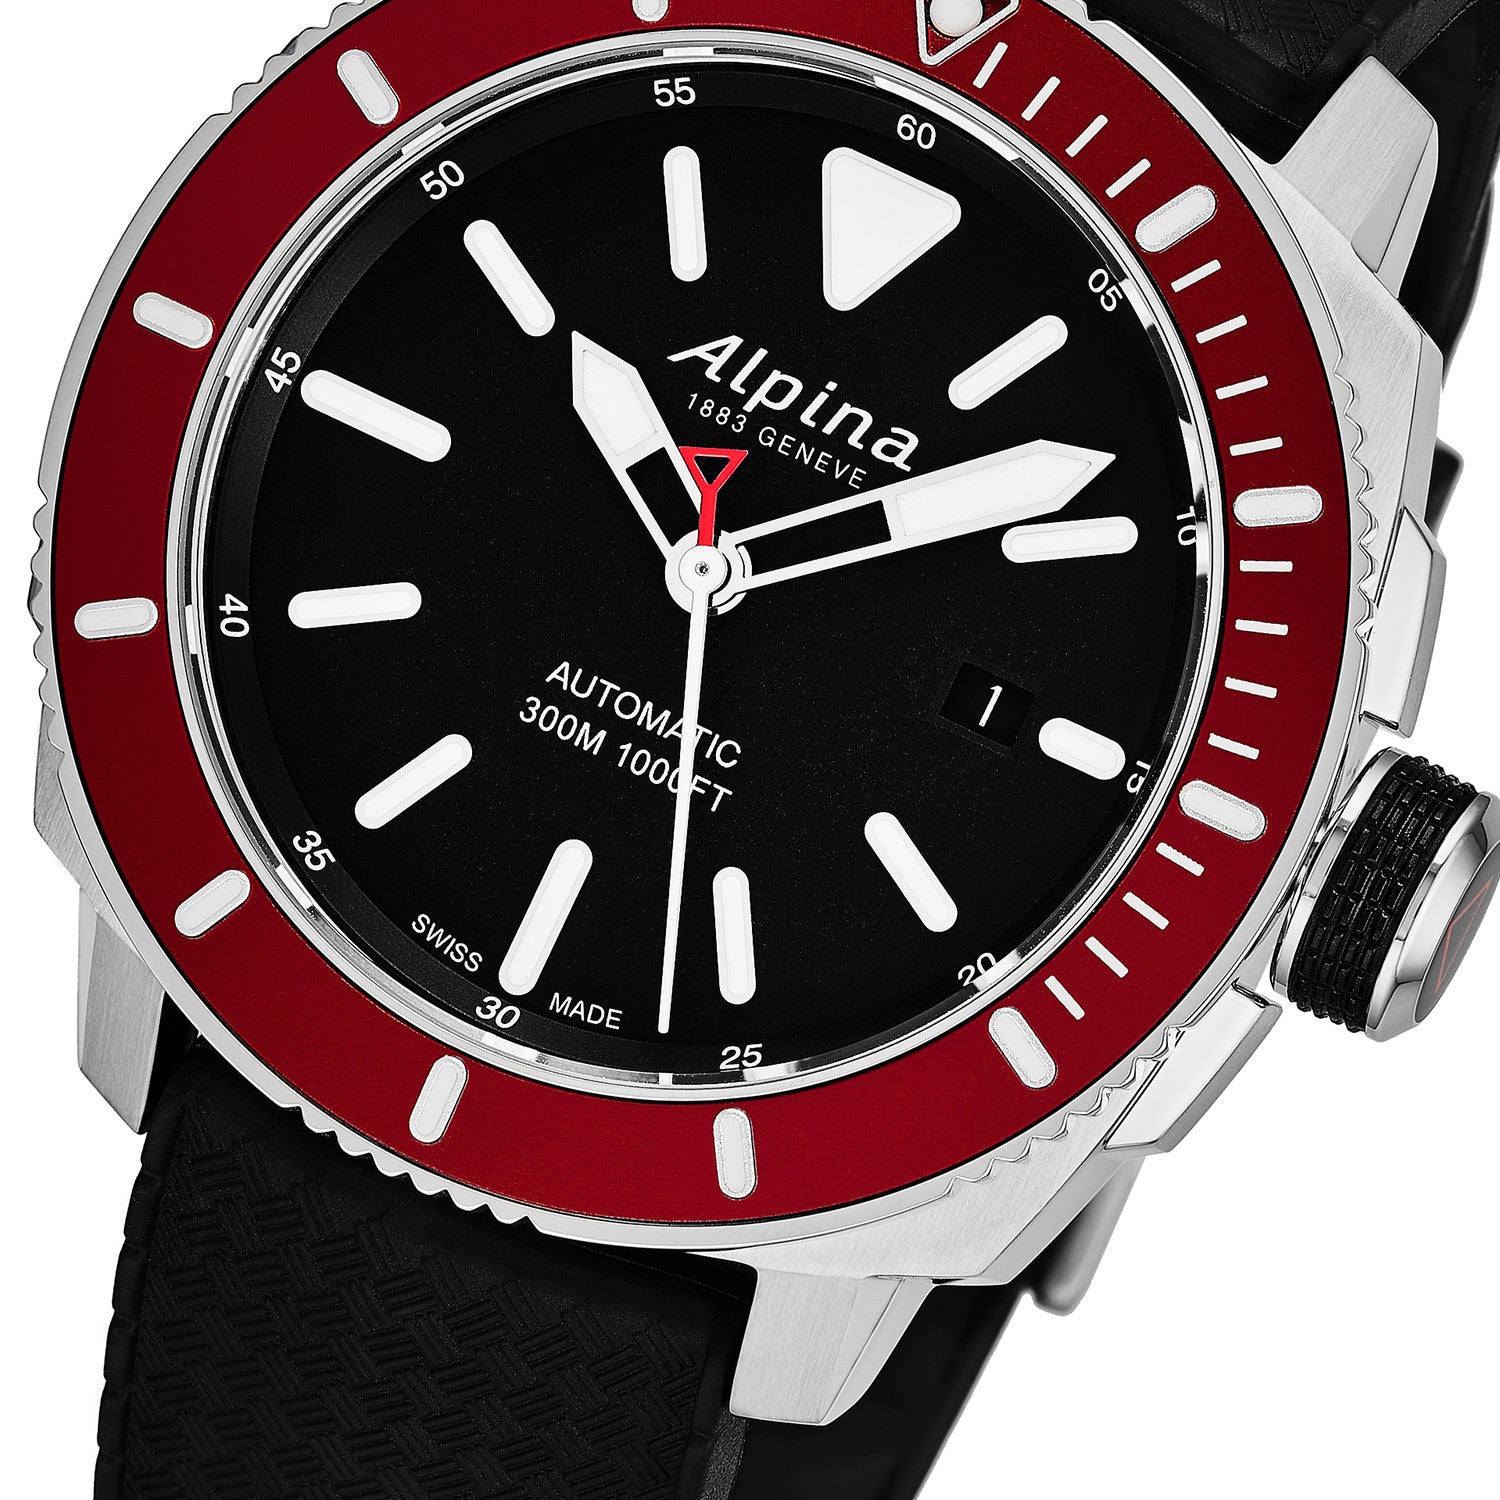 Seatrong Diver 300 Automatic (Black-Red) | Alpina | Luby 